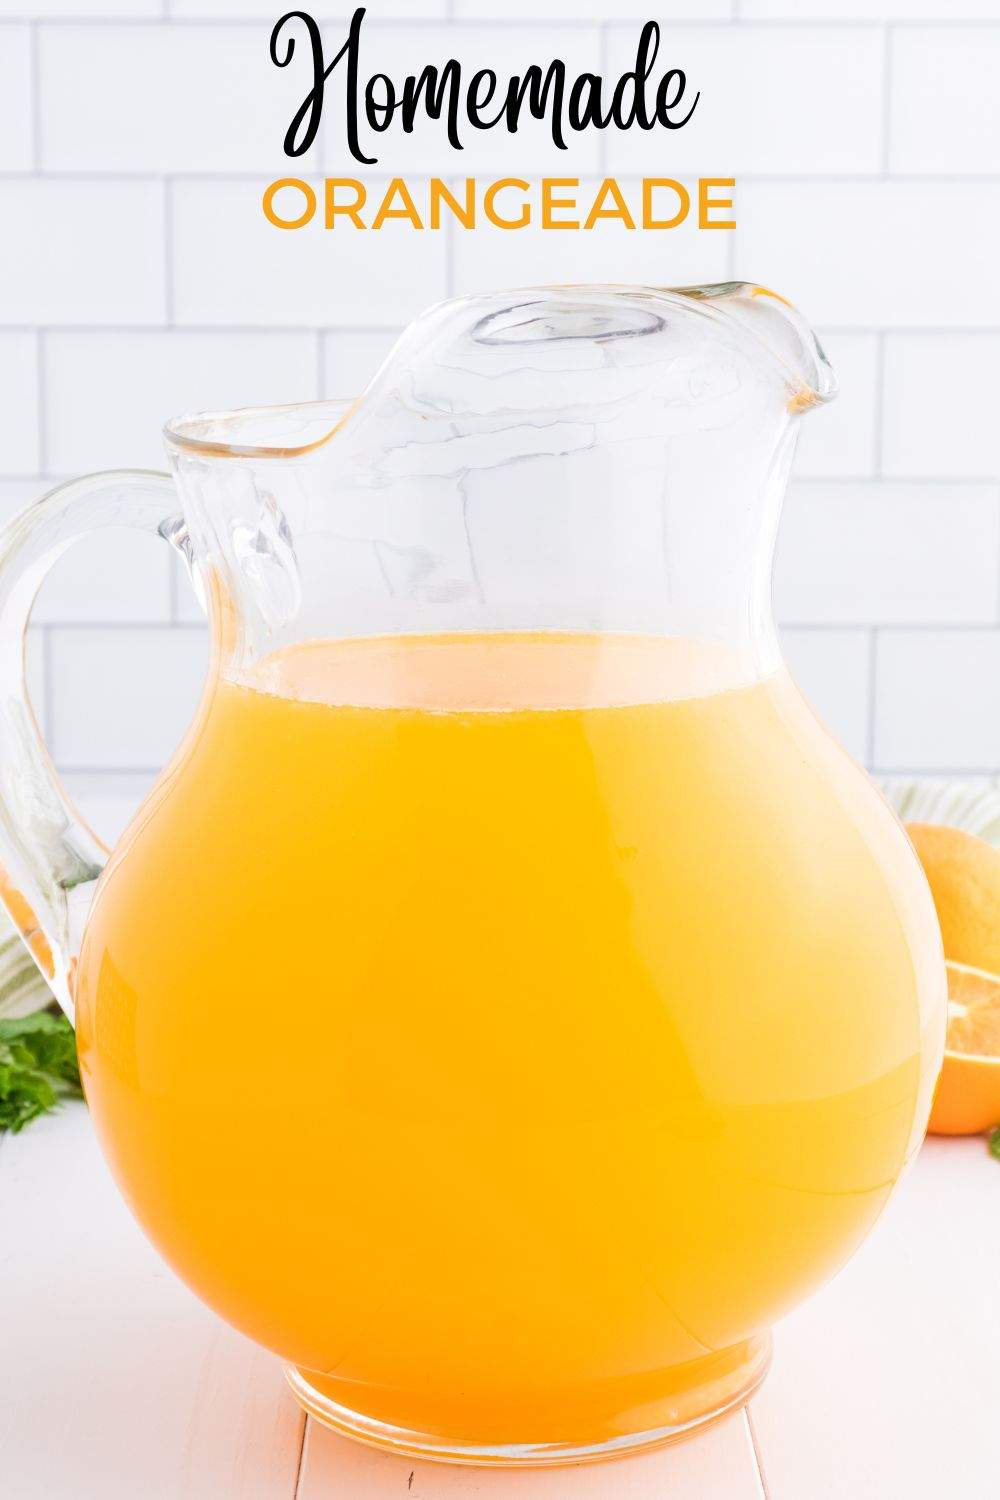 With the flavors of orange, lemon, and honey in one ice-cold glass, this Homemade Orangeade is set to become your new favorite summer drink. via @familyfresh